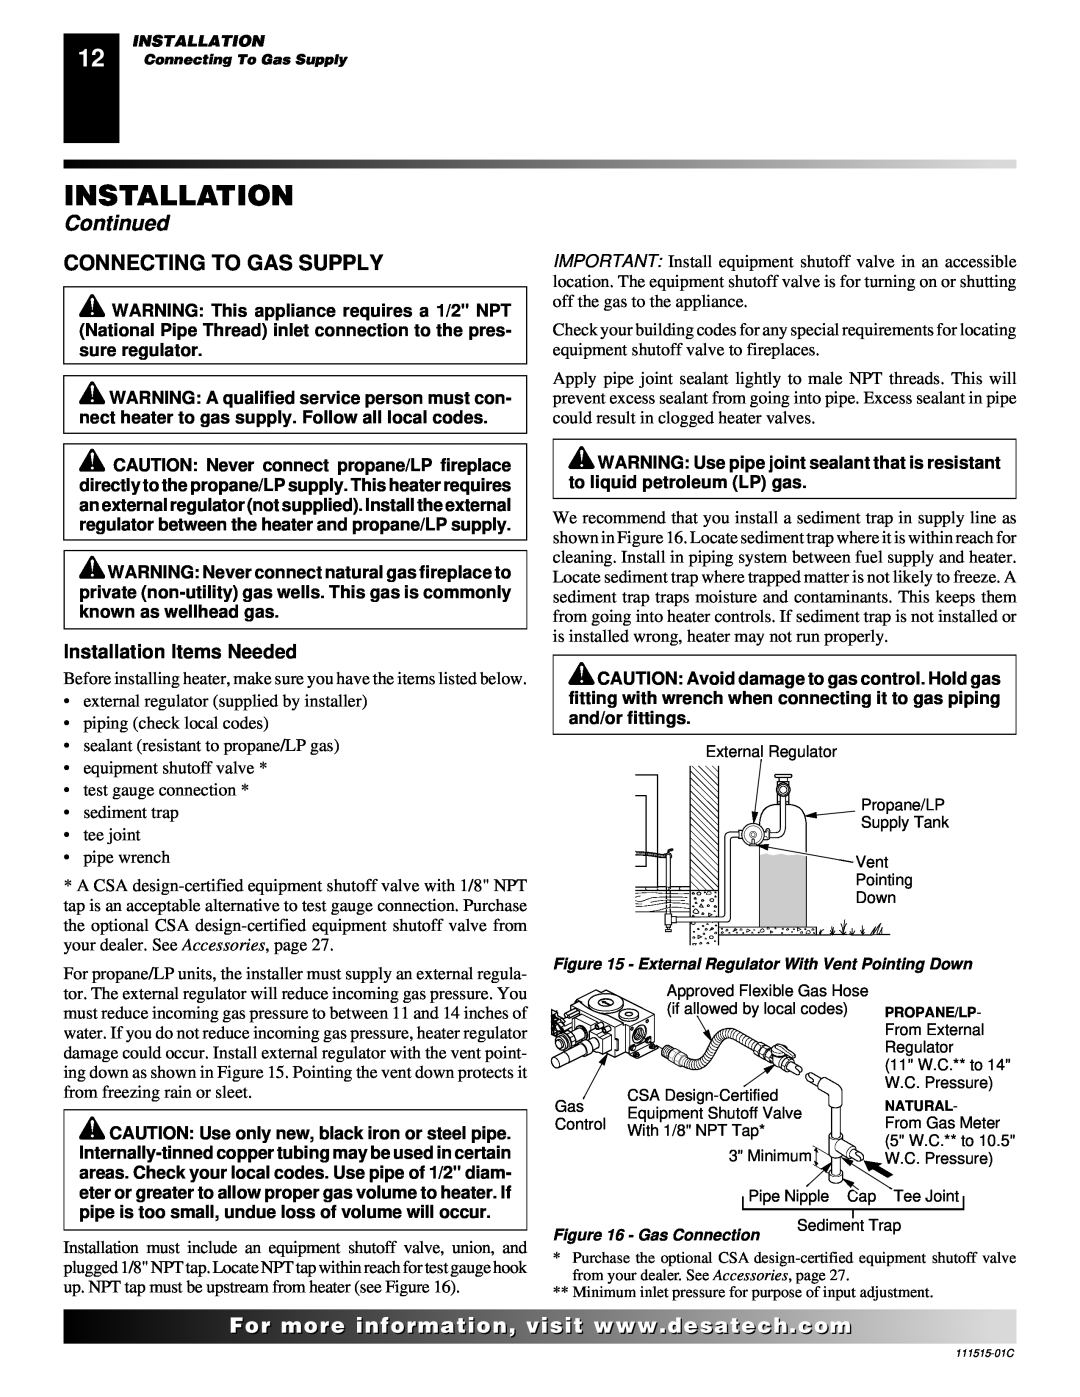 Desa LDL3930PR, LDL3930NR, LDL3924PR installation manual Connecting To Gas Supply, Continued, Installation Items Needed 